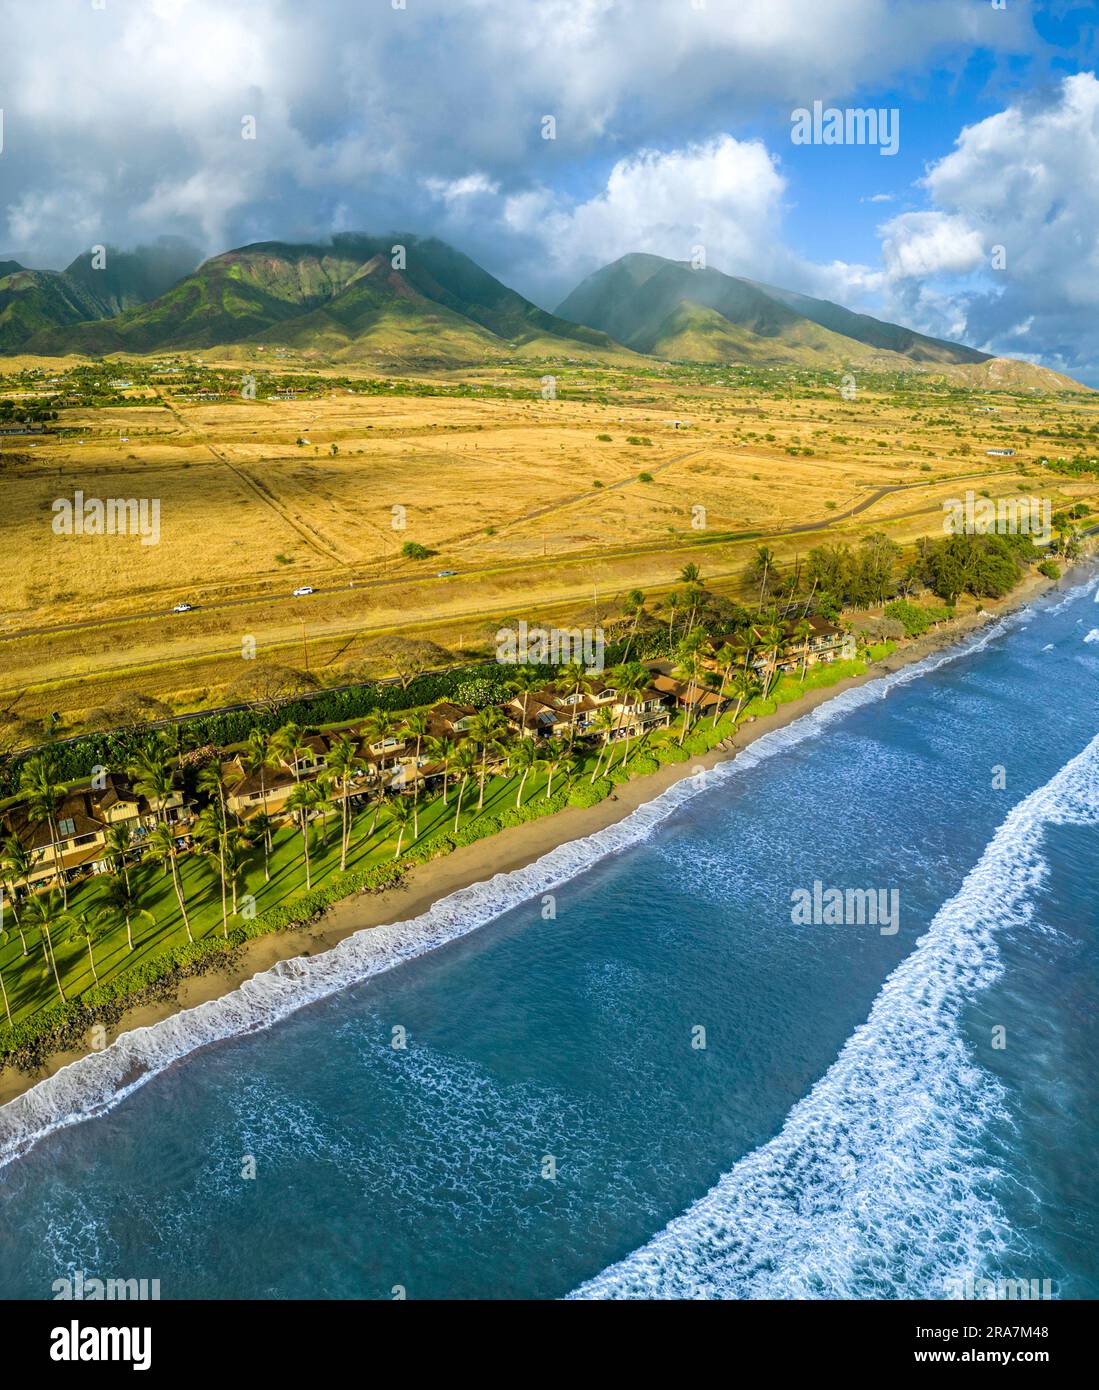 An aerial view of the West Maui Mountains from above the Puamana condos just south of Lahaina, Maui, Hawaii, USA. Stock Photo